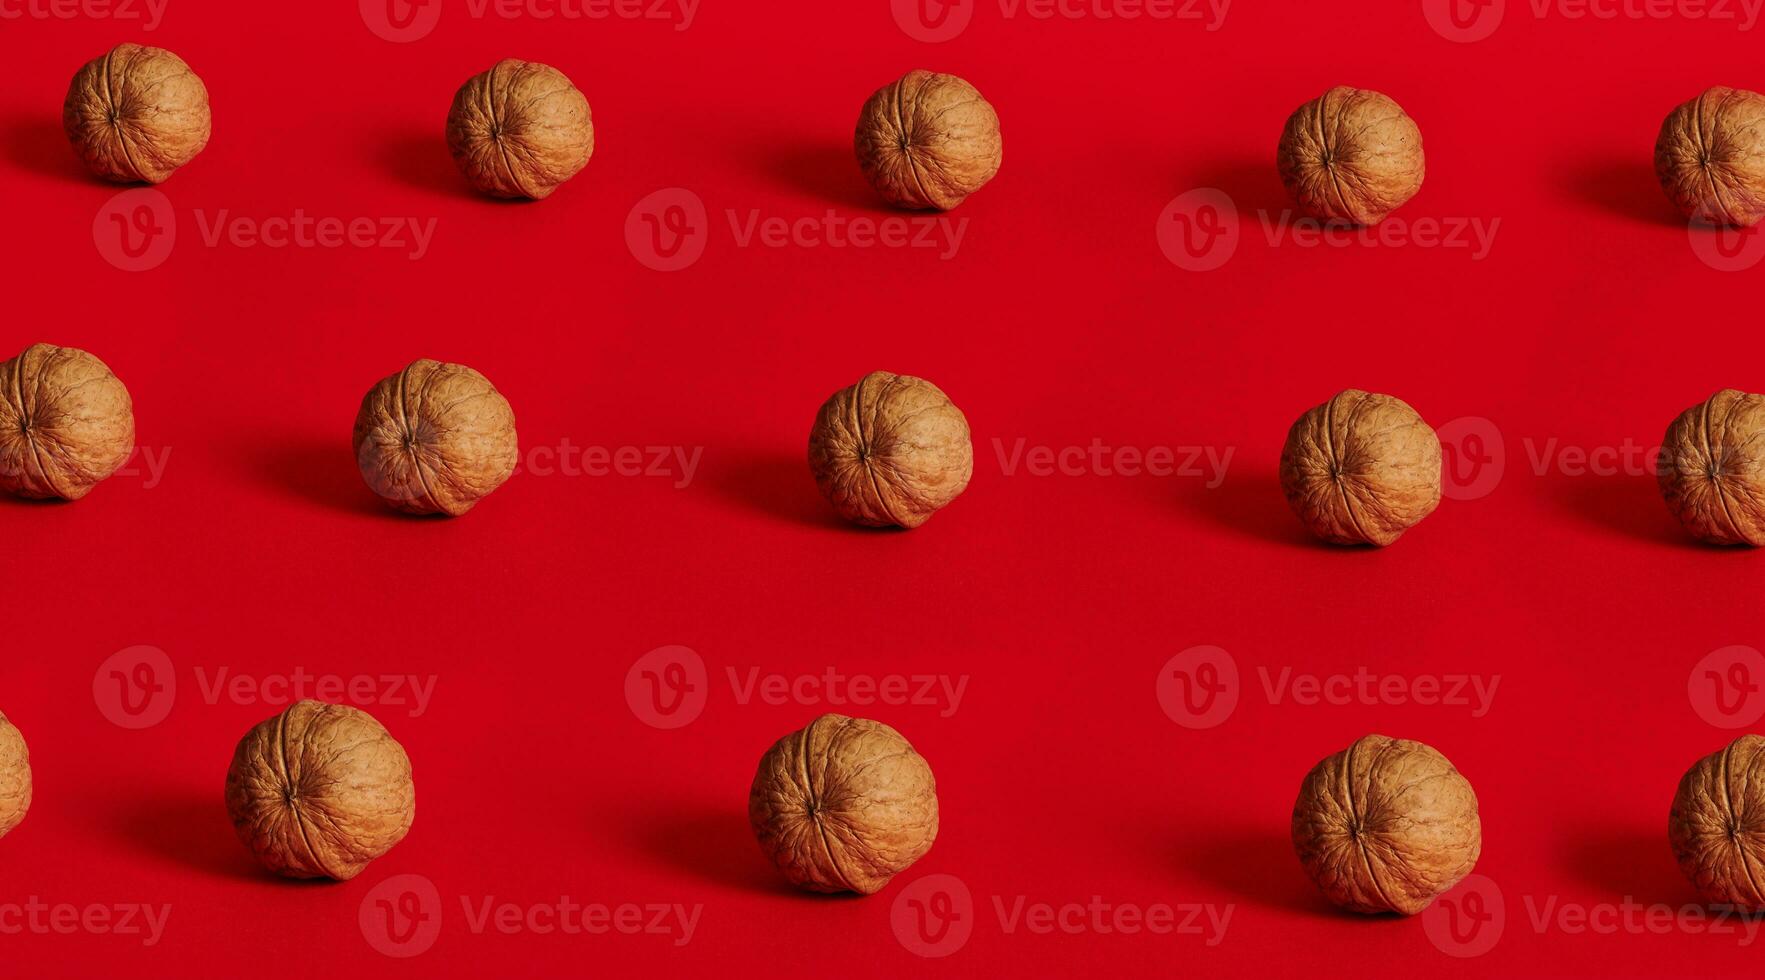 Walnut pattern on red background with space for text photo